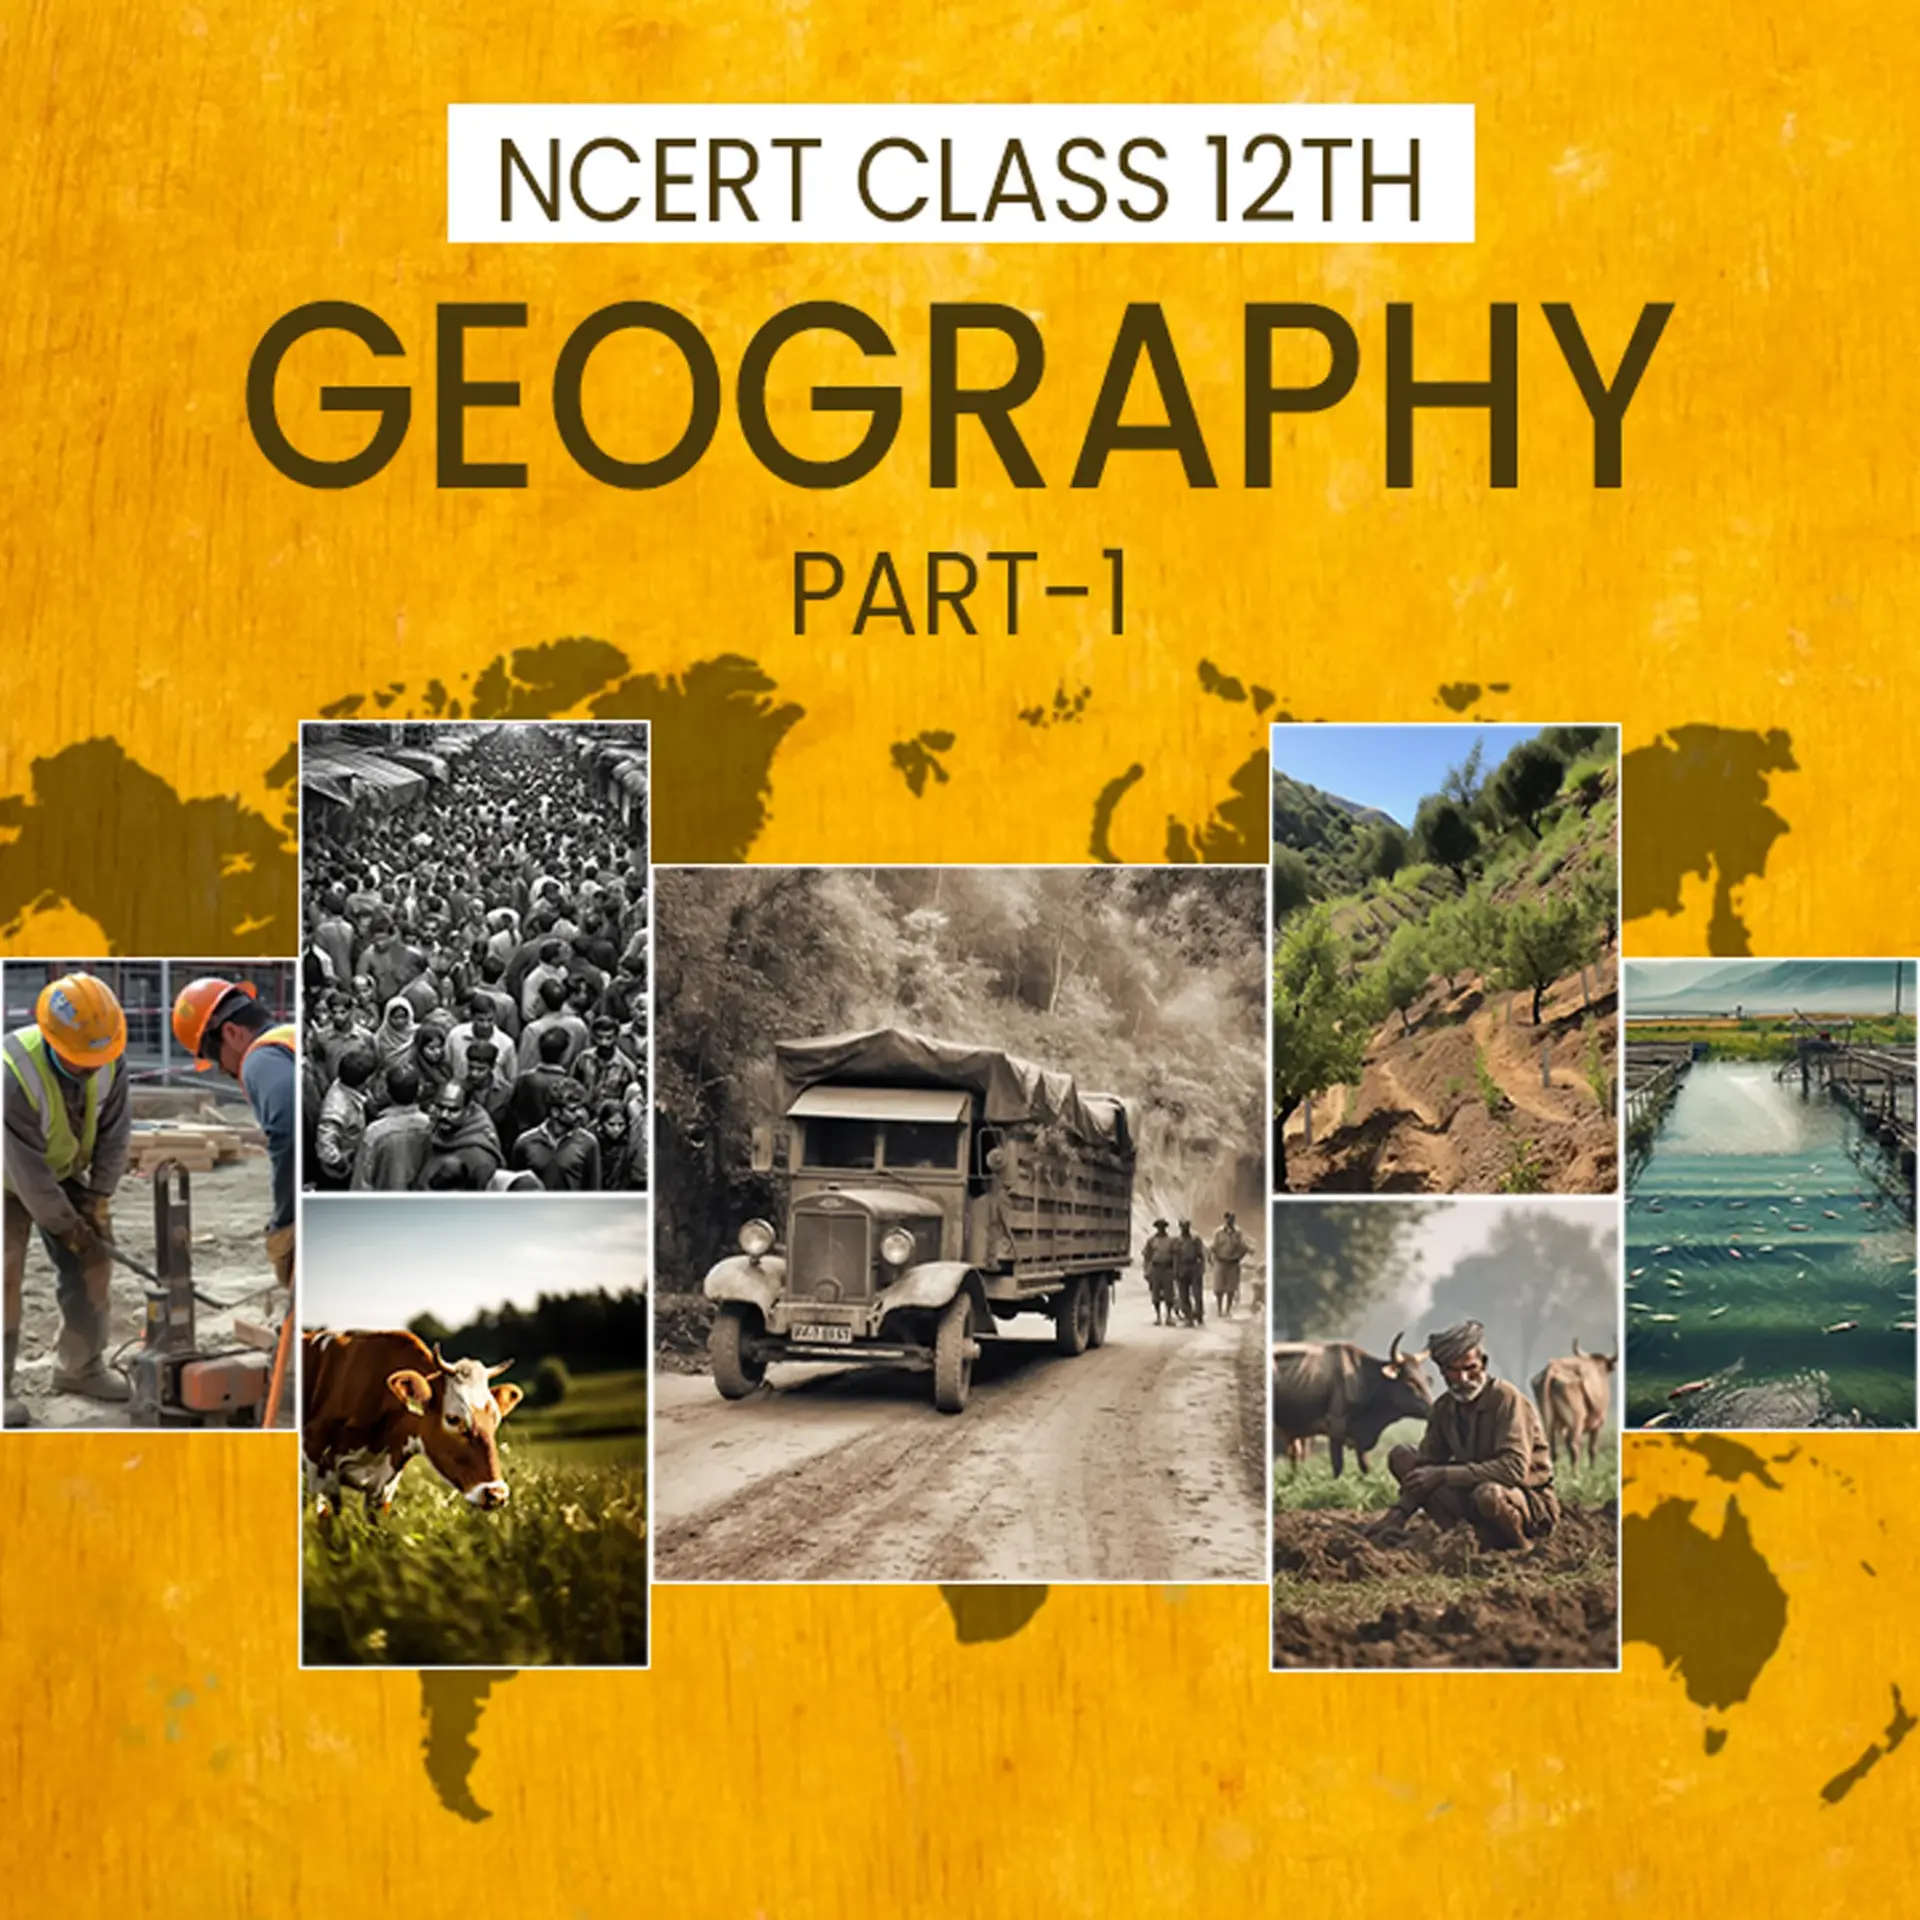 NCERT Class 12th Geography Part 1 | 